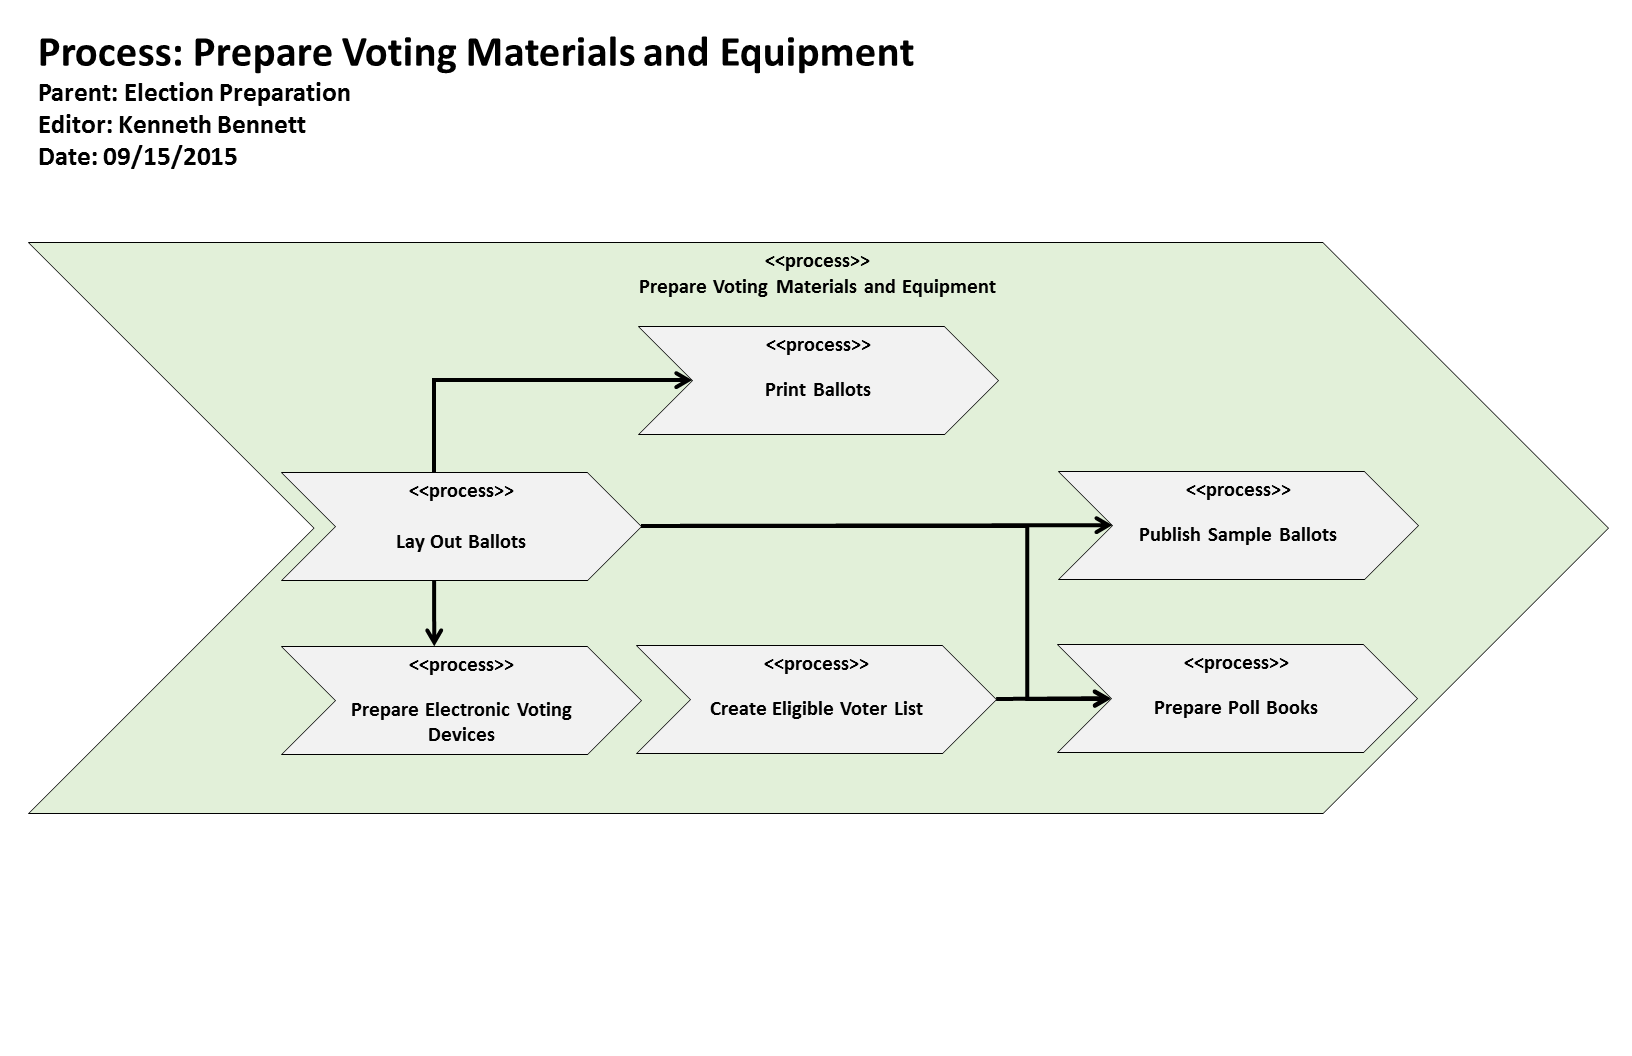 KB Process: Process: Prepare Voting Materials and Equipment